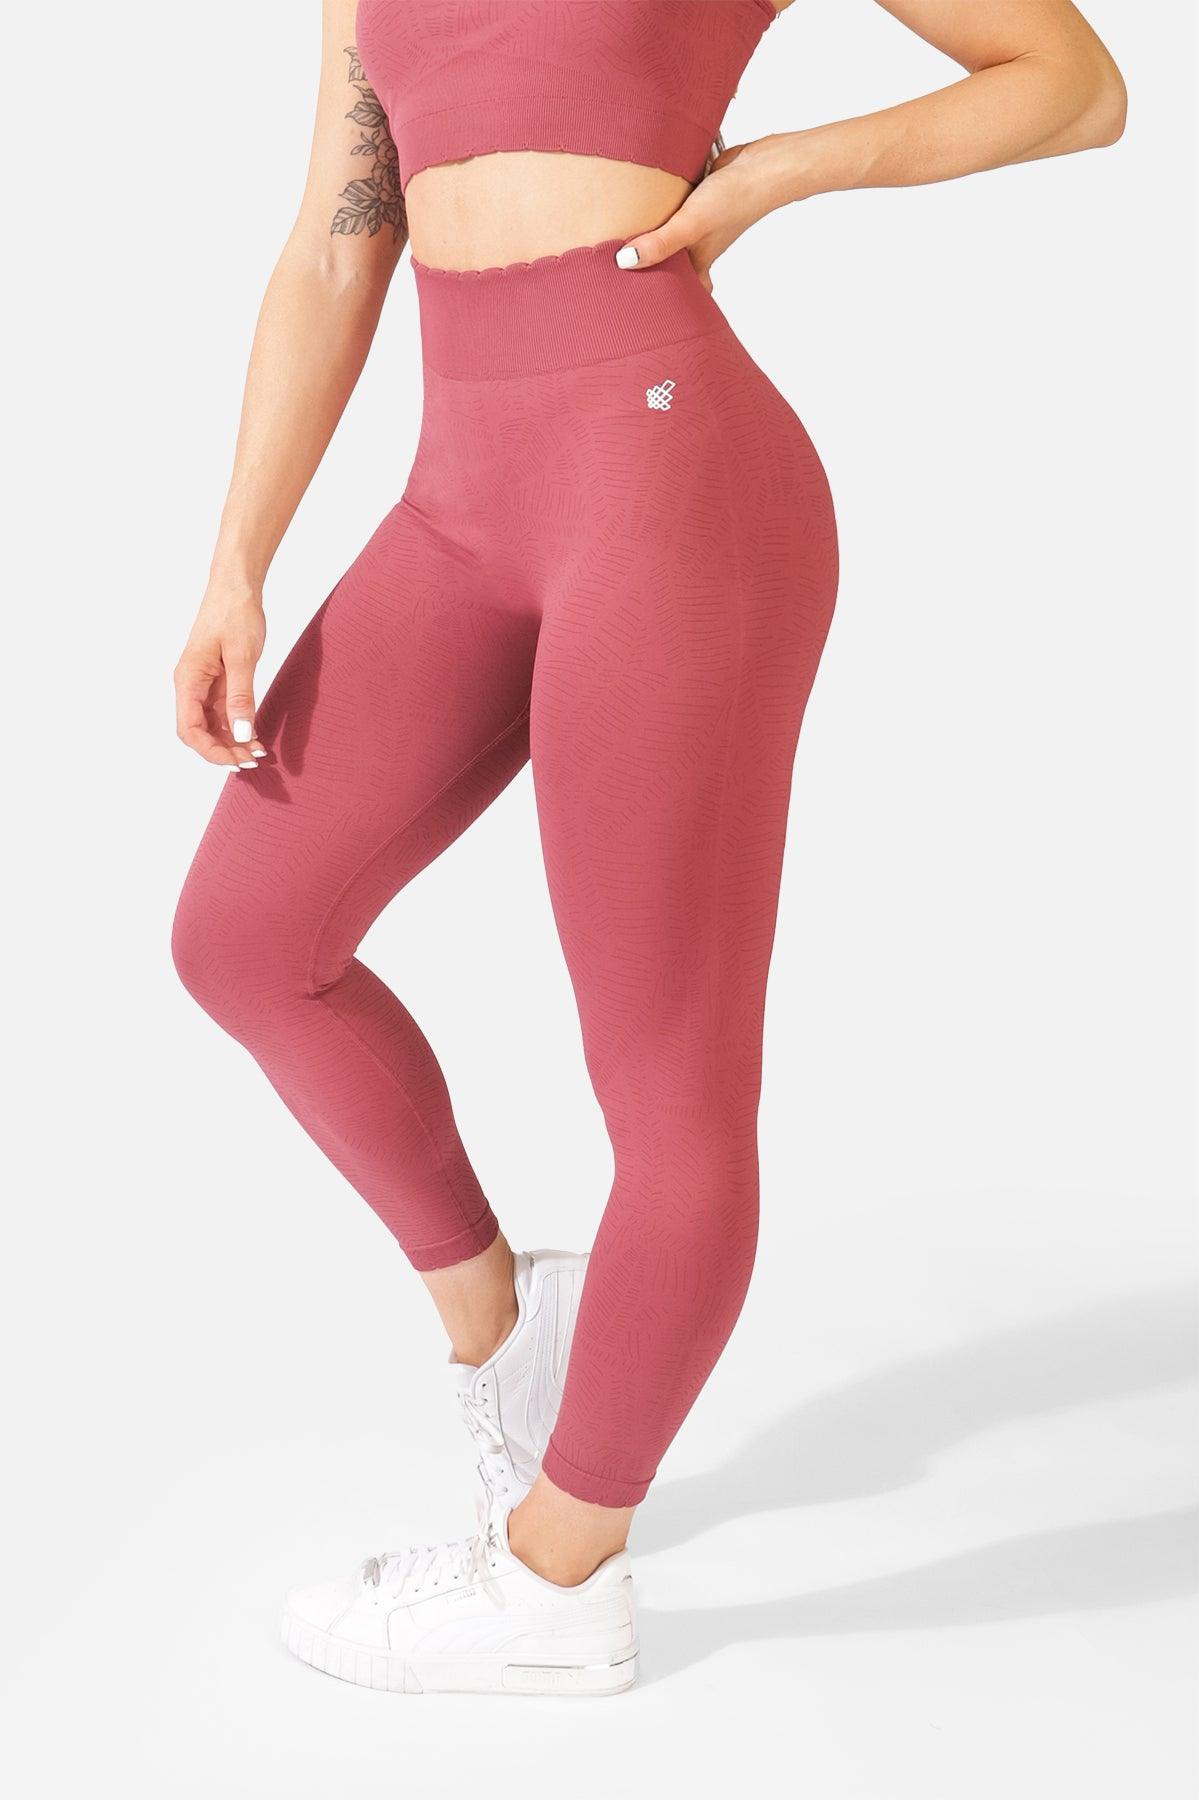 Scallop Hem Leggings - Etched Pink - Jed North Canada